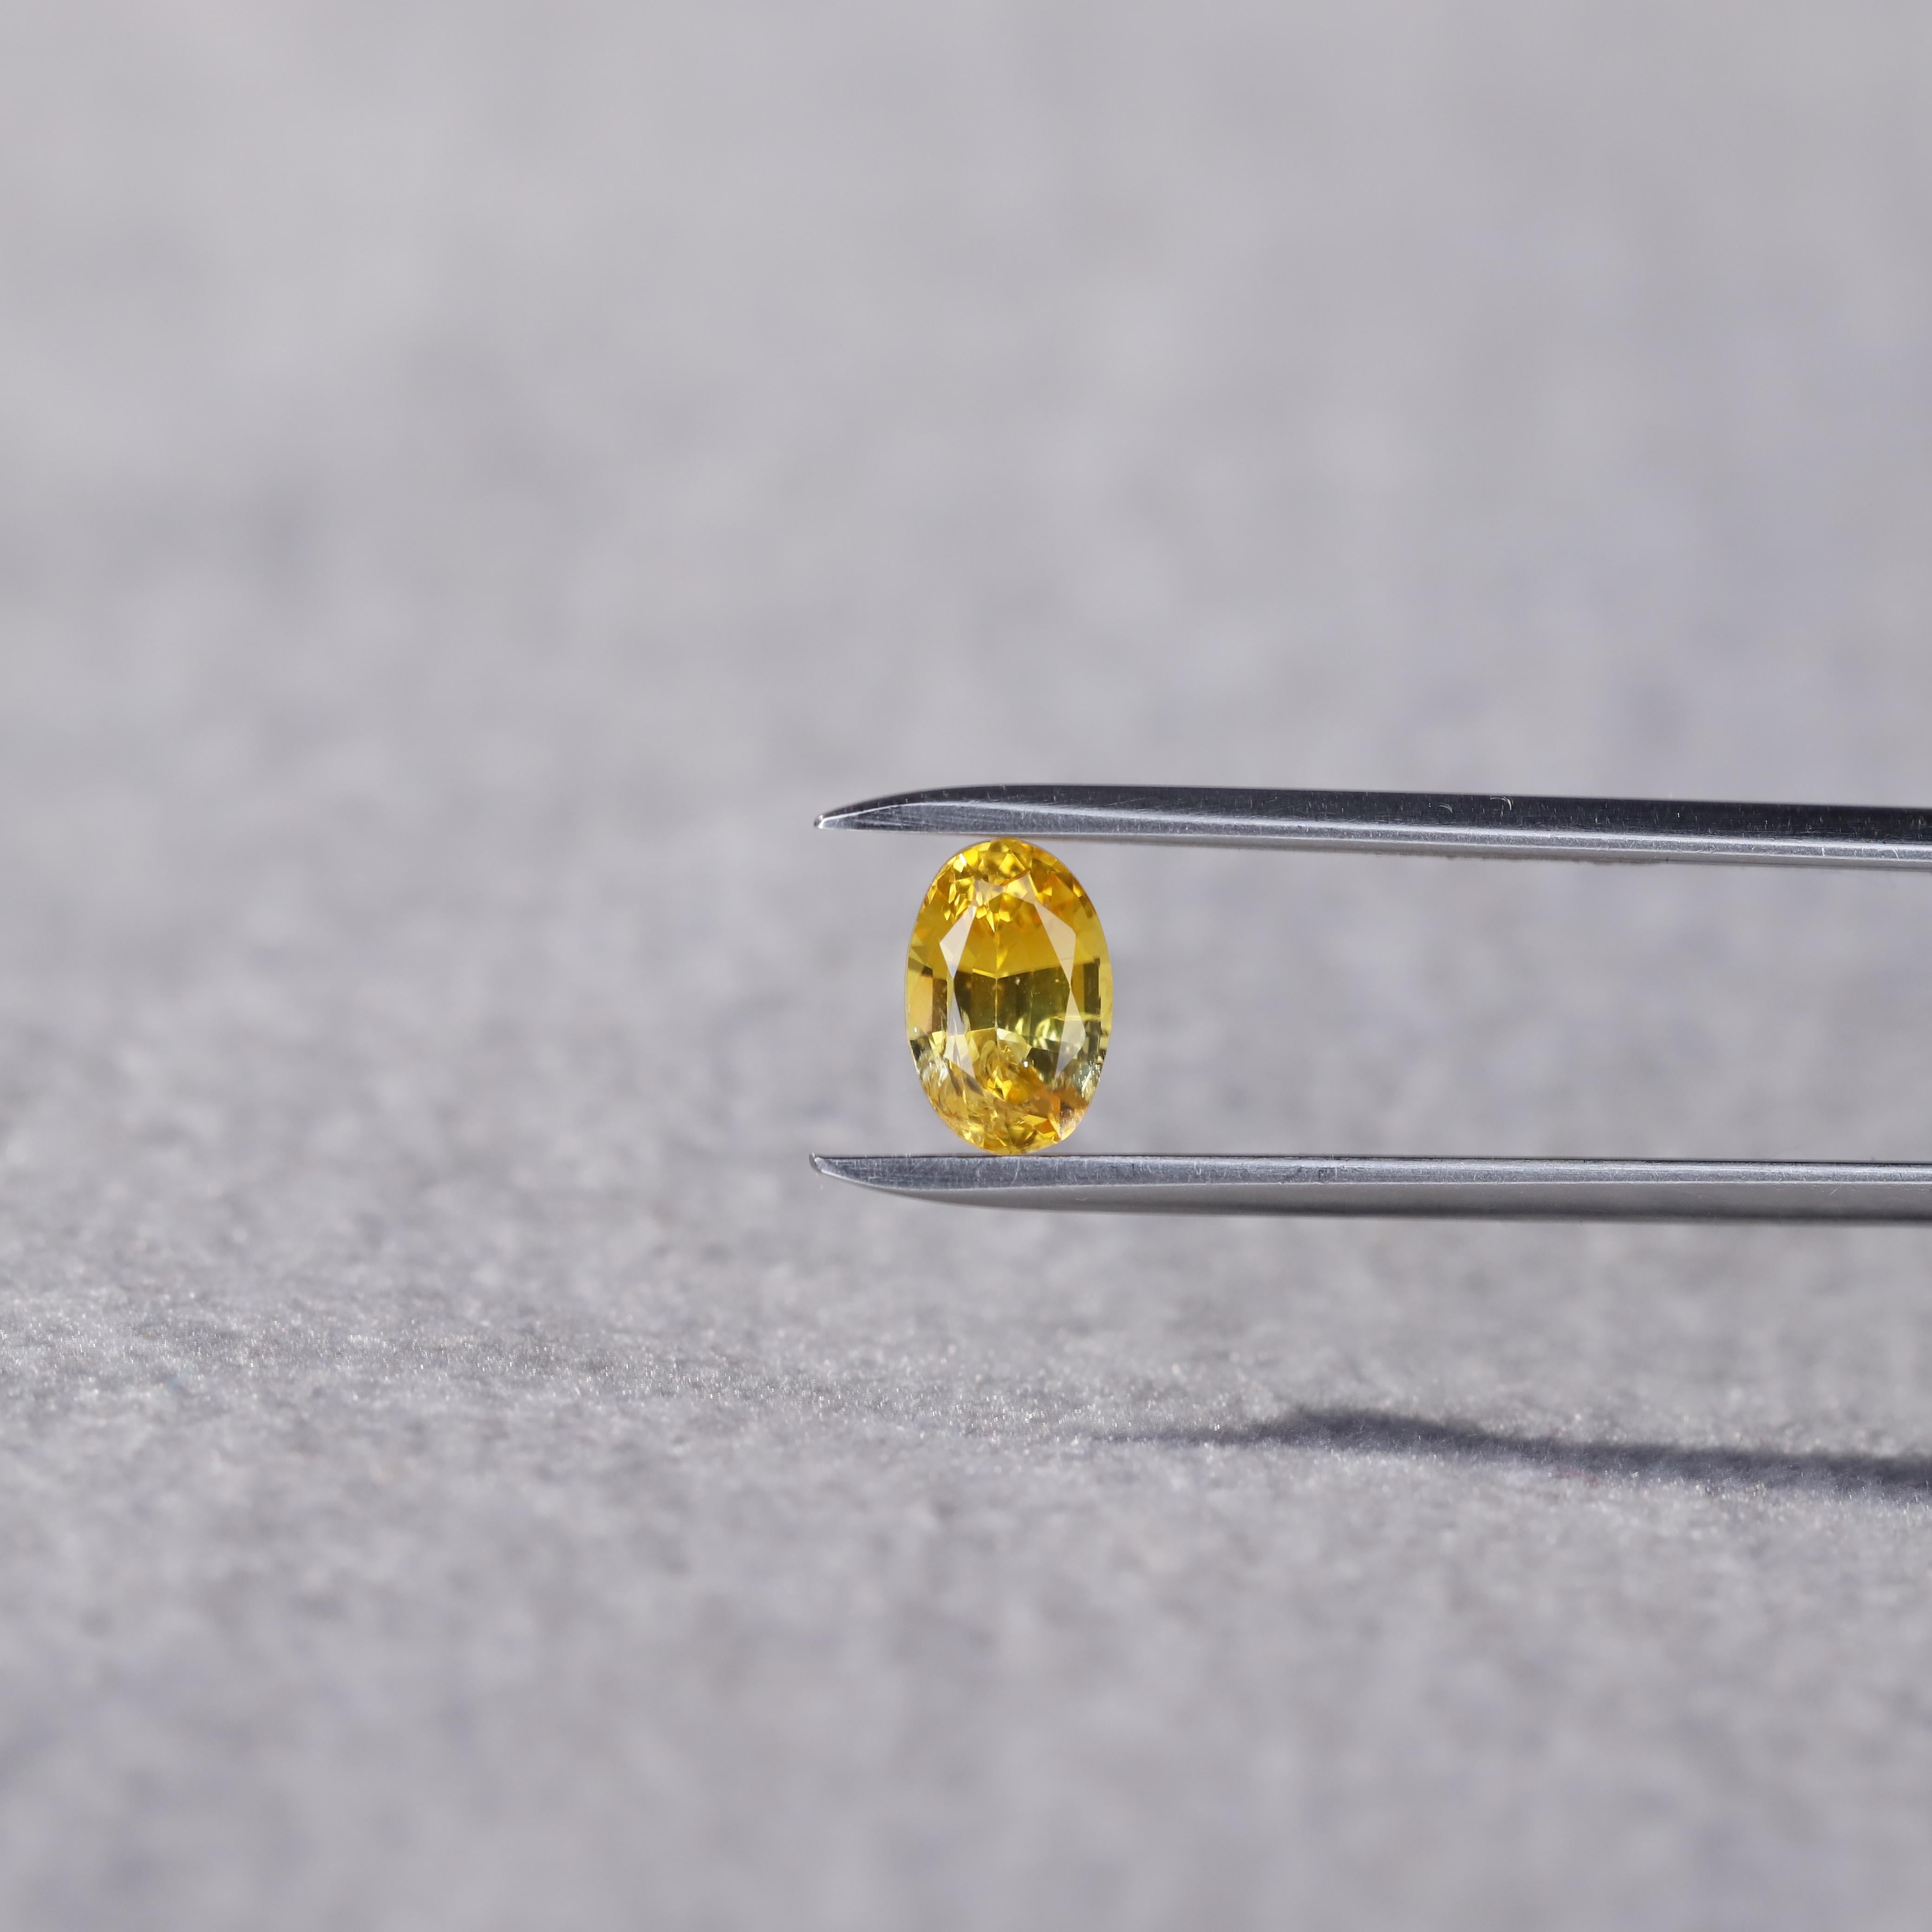 Oval Cut 1.28 Carat Canary Yellow Natural Sapphire Loose Gemstone from Sri Lanka For Sale